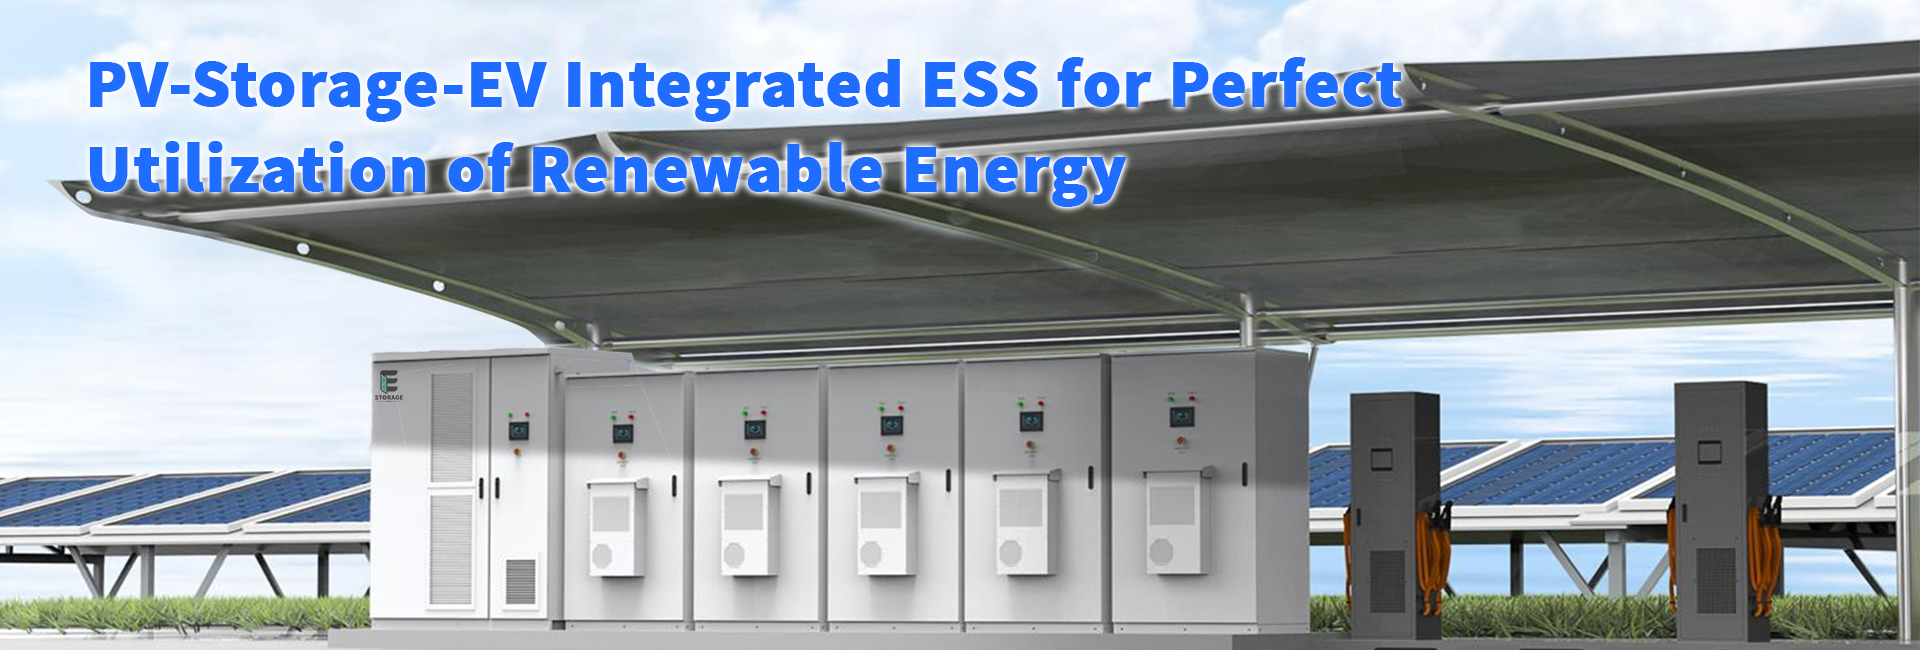 PV-Storage-EV Integrated ESS for Perfect Utilization of Renewable Energy